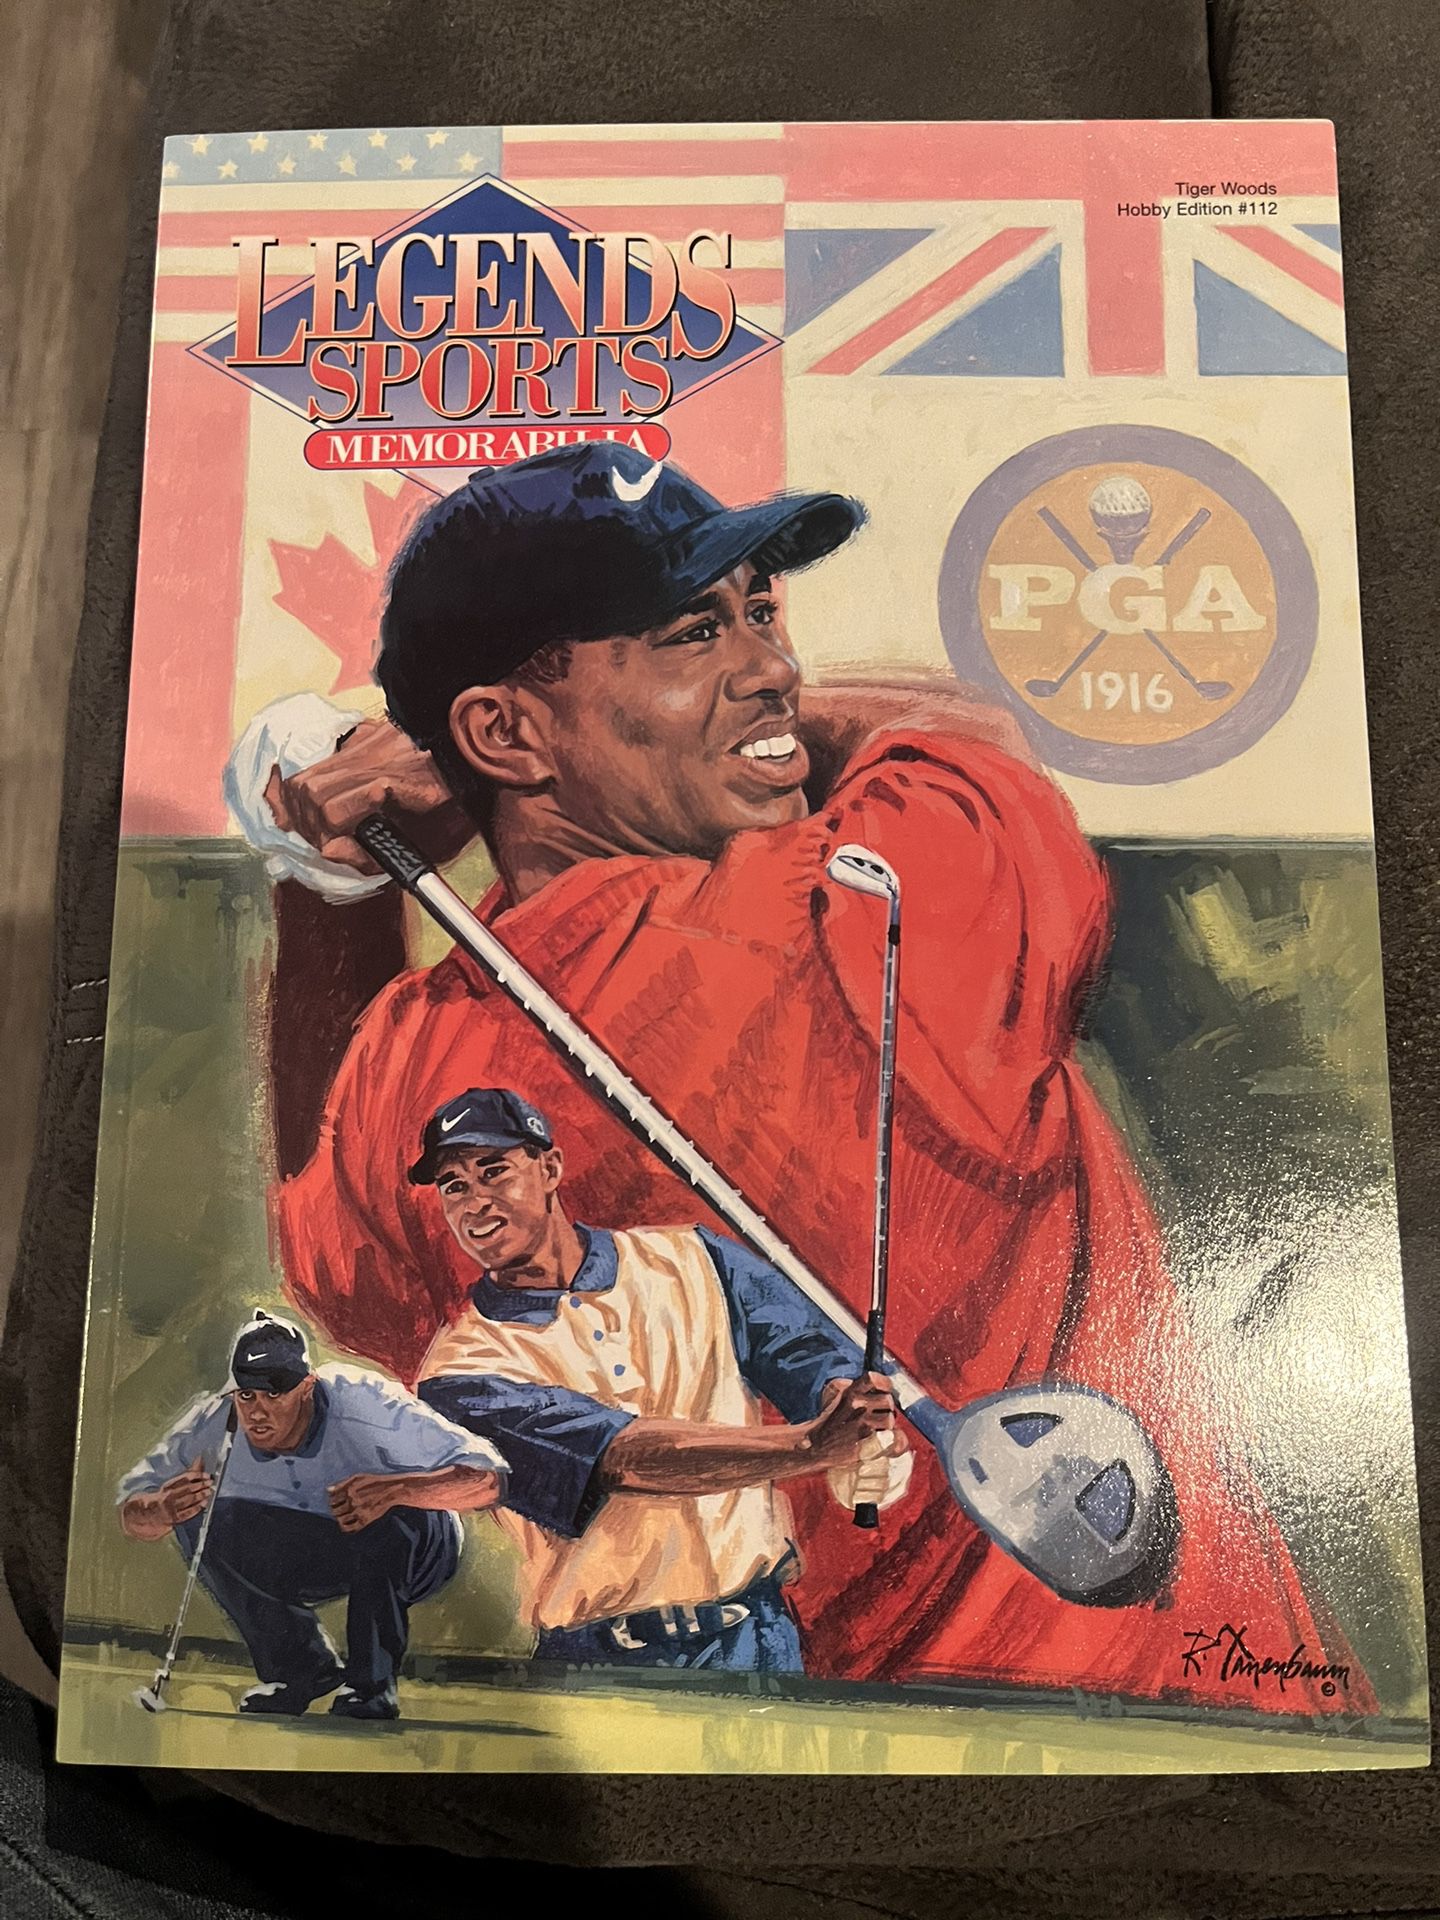 Tiger Woods Hobby Addition # 112 